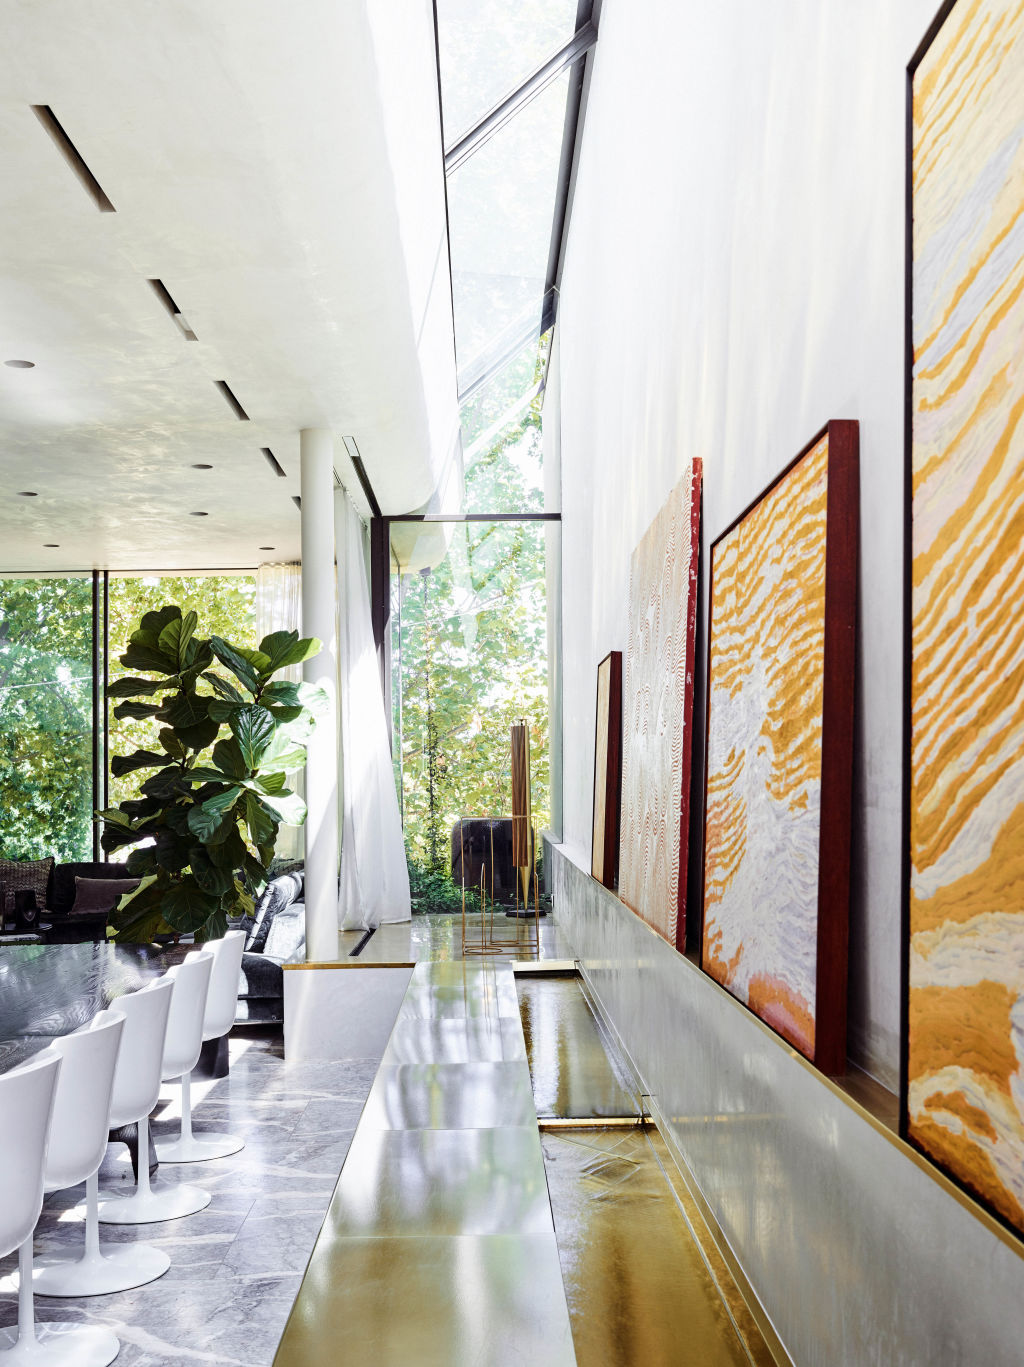 A brass-lined water feature flows through the living space. Photo: Kay & Burton